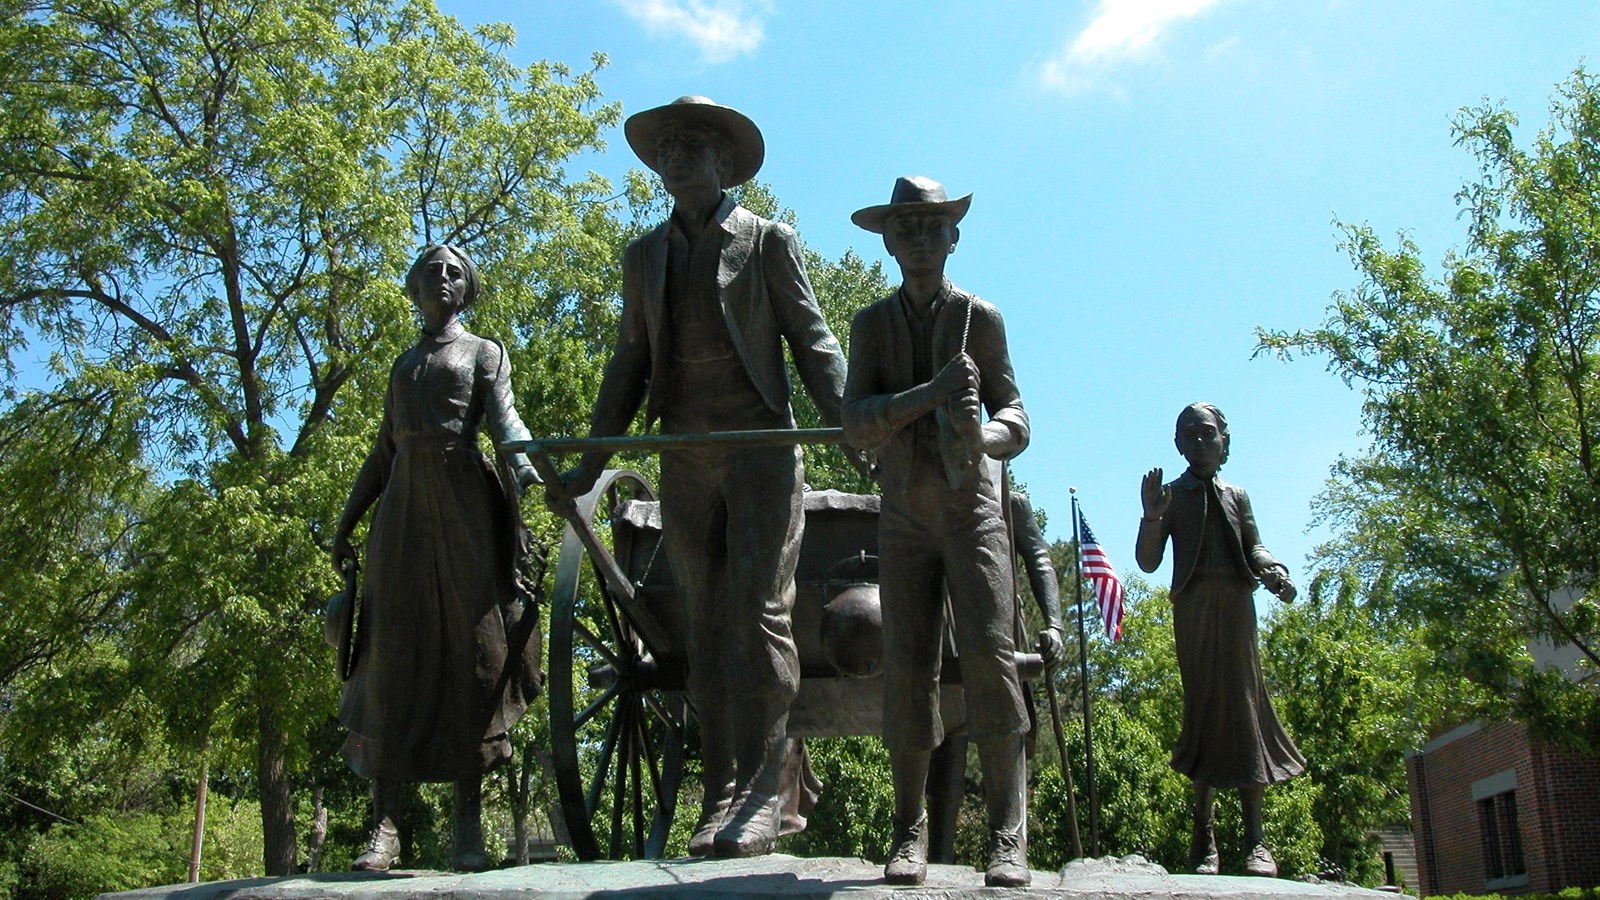 A sculpture of pioneers pulling a handcart, set in a park.